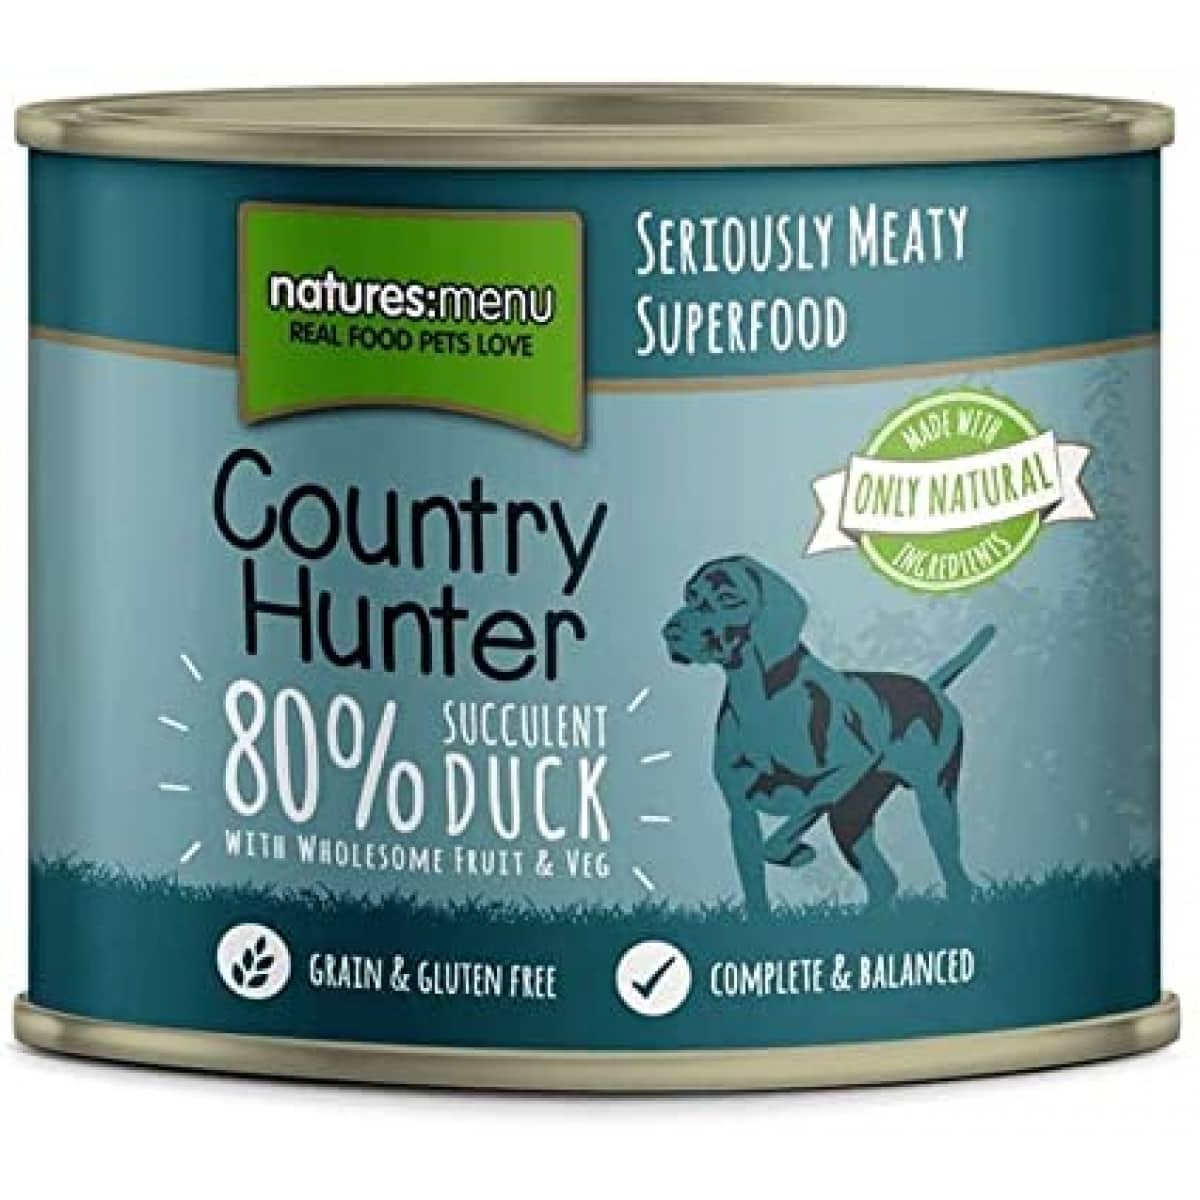 Country Hunter 80% Duck 600g – Pawfect Supplies Ltd Product Image